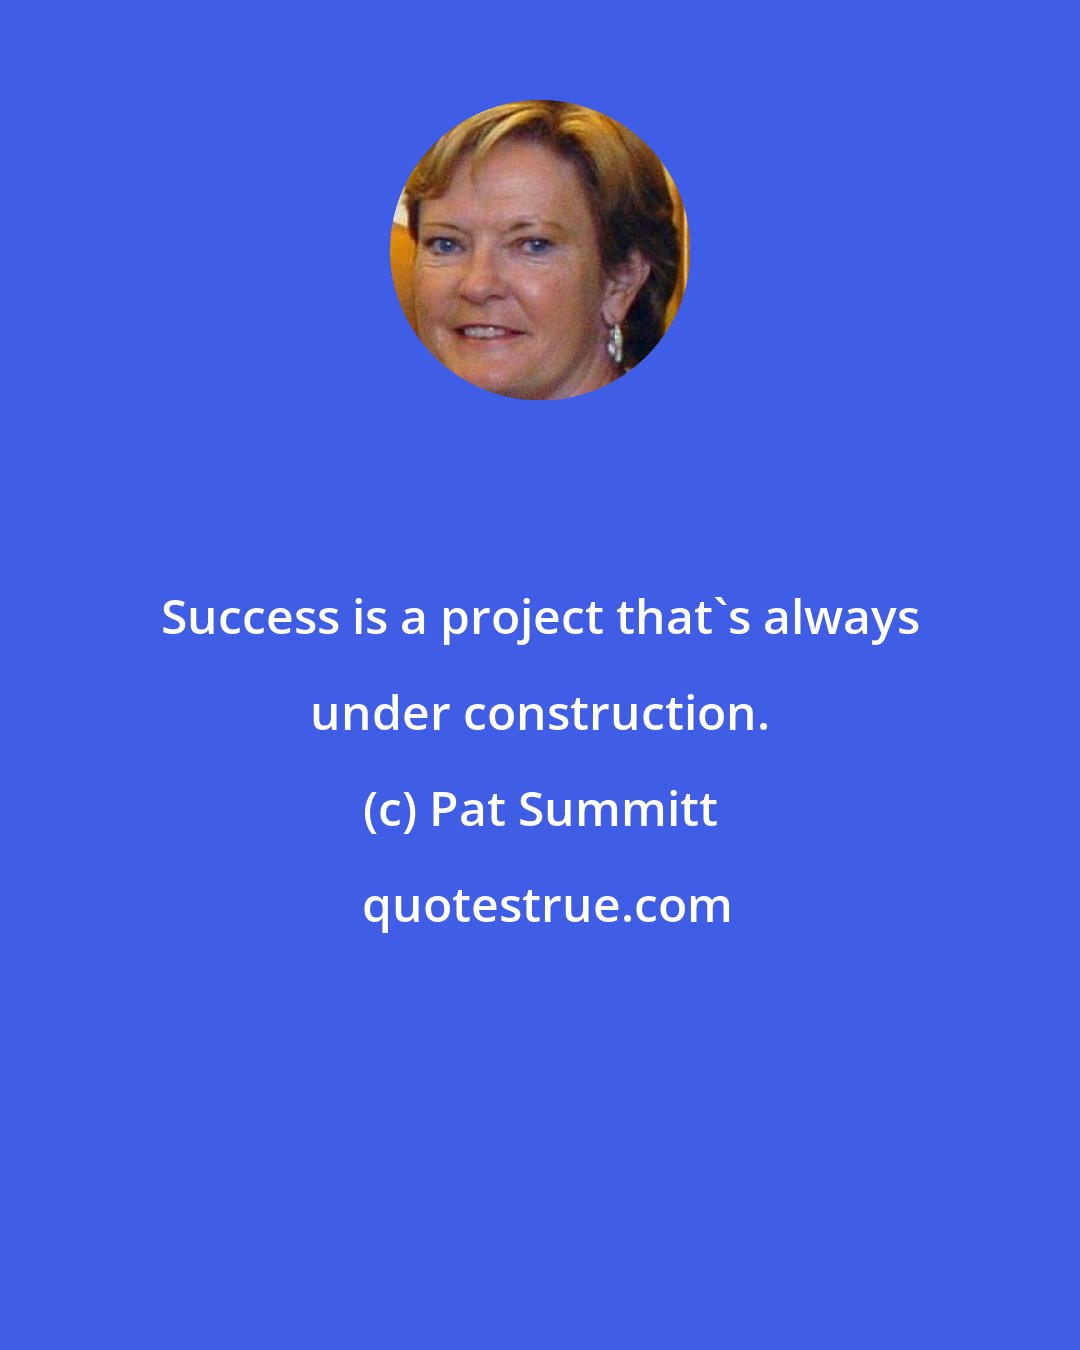 Pat Summitt: Success is a project that's always under construction.